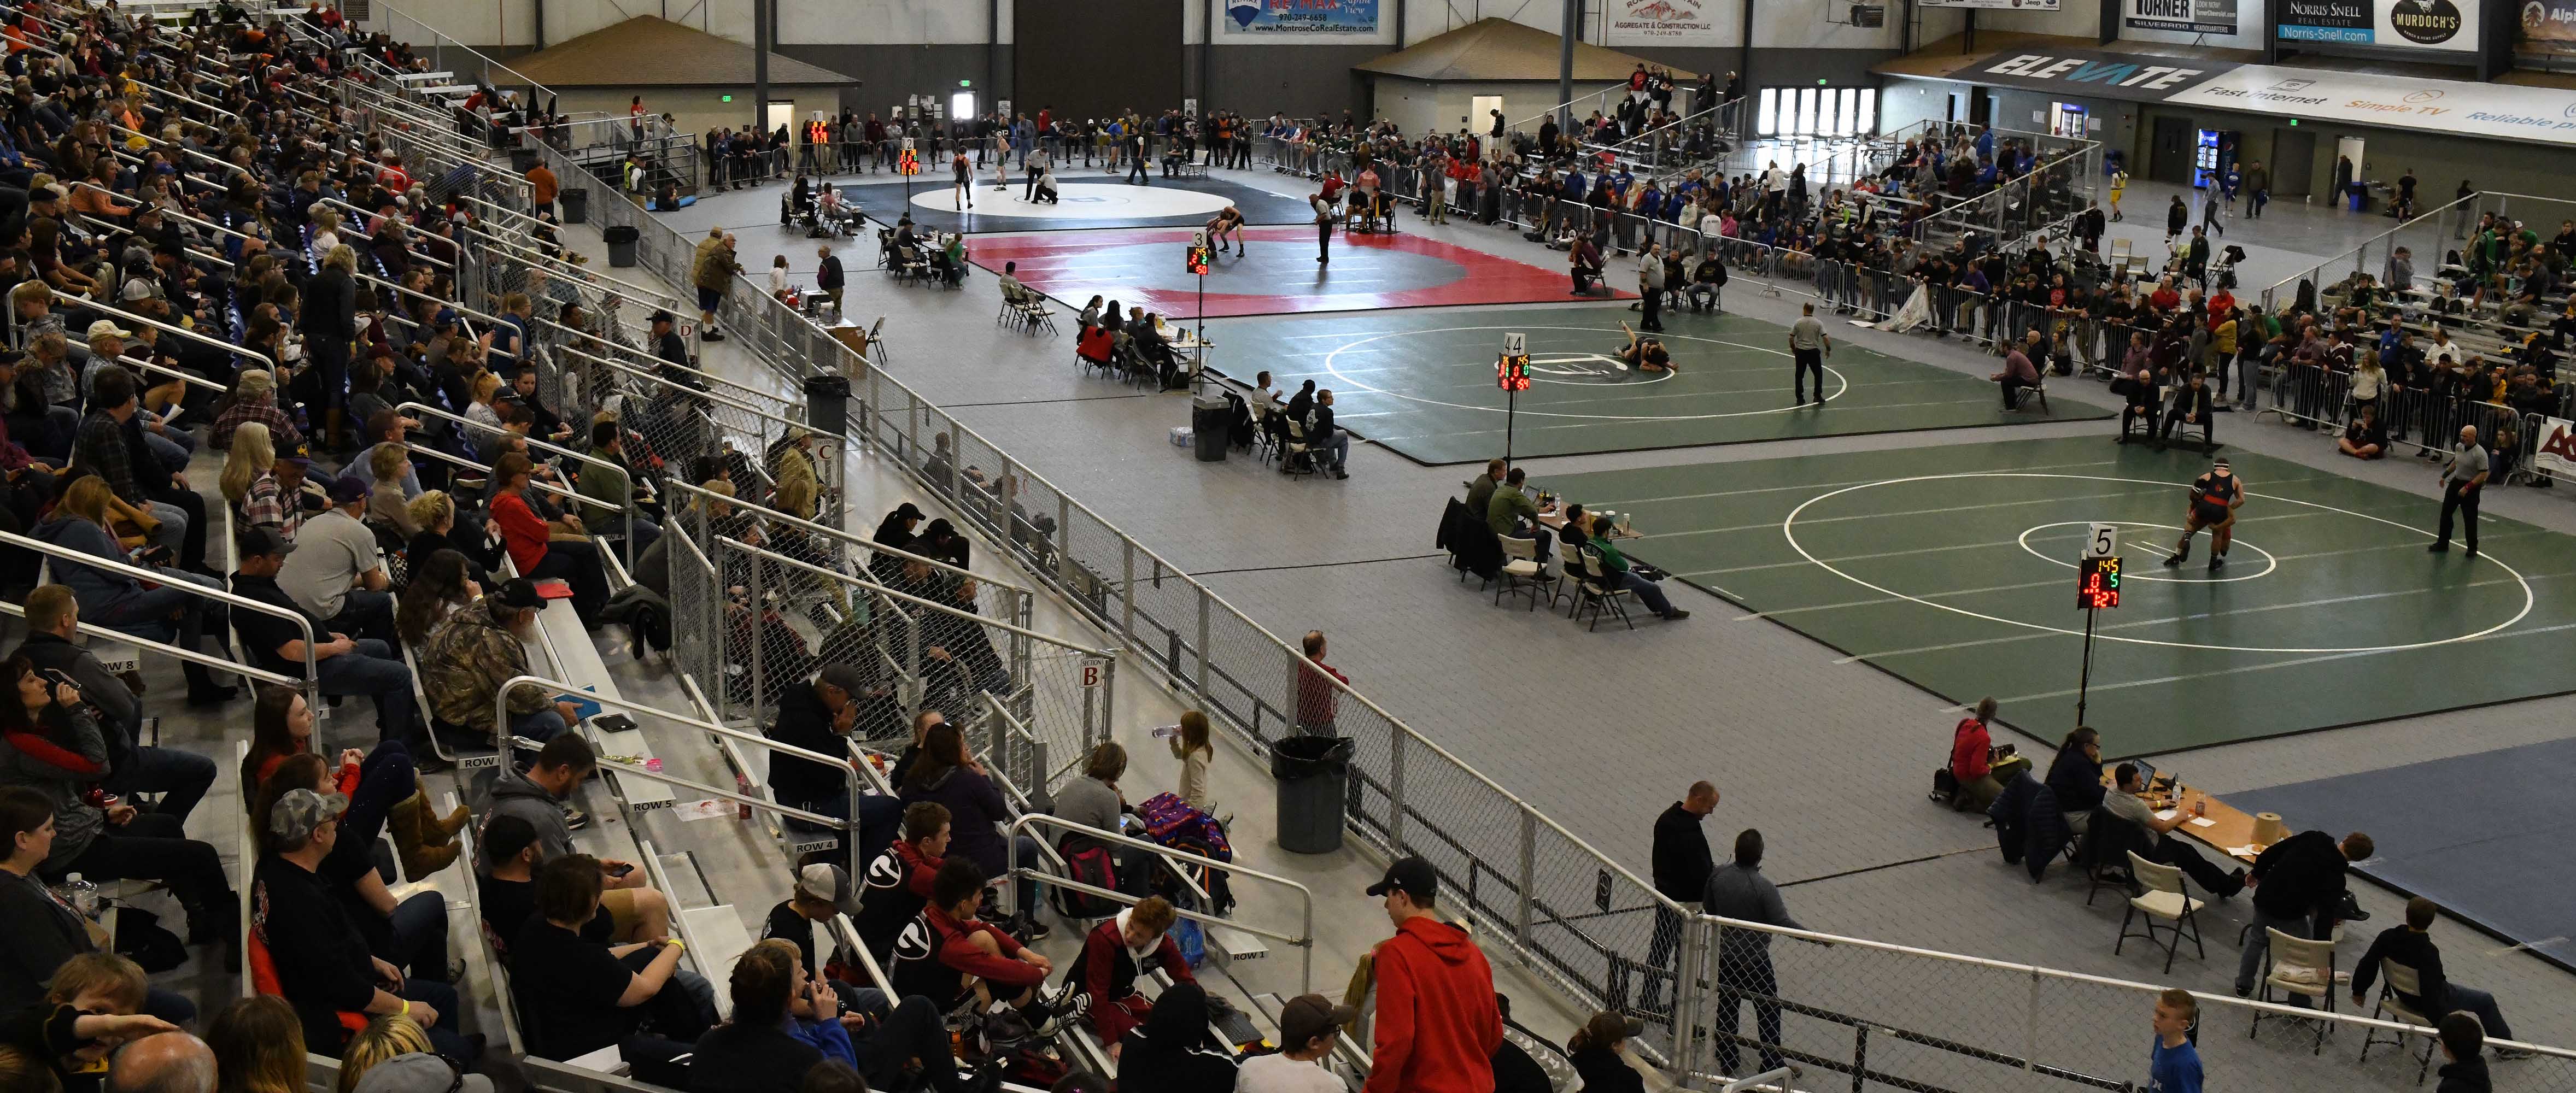 wrestling tournment at event center with people in stadium watching